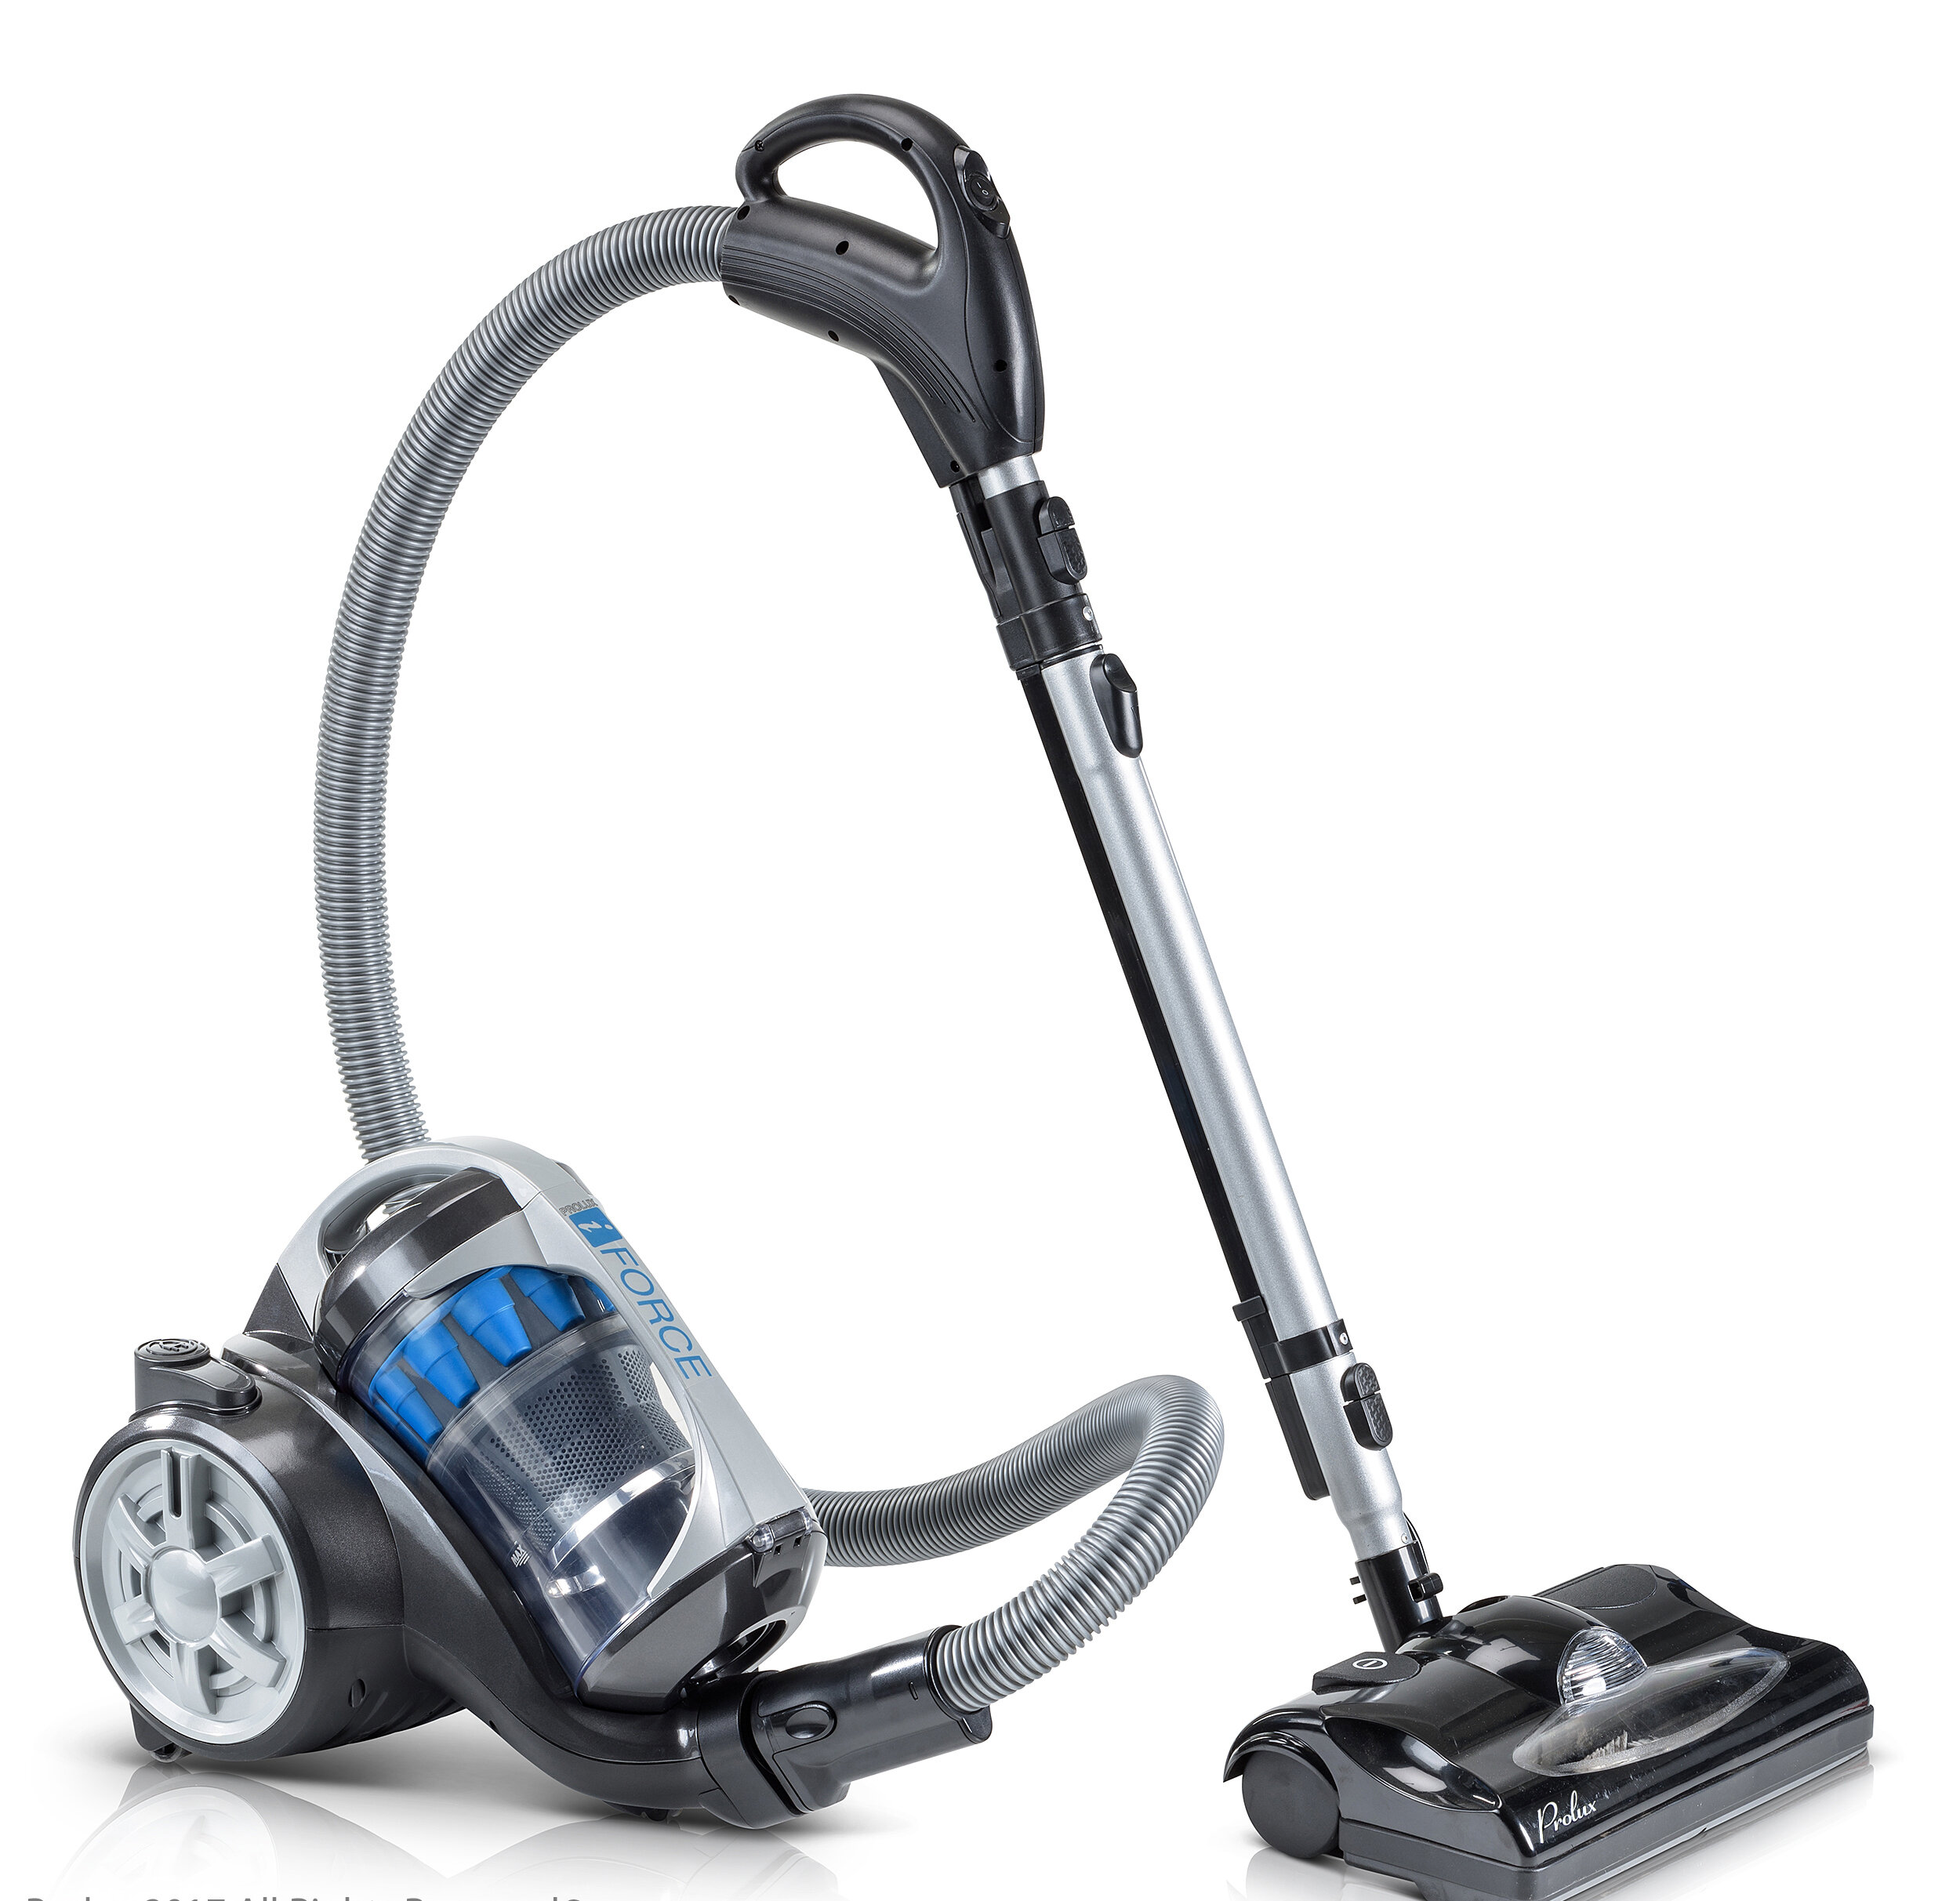 what's the most powerful vacuum cleaner